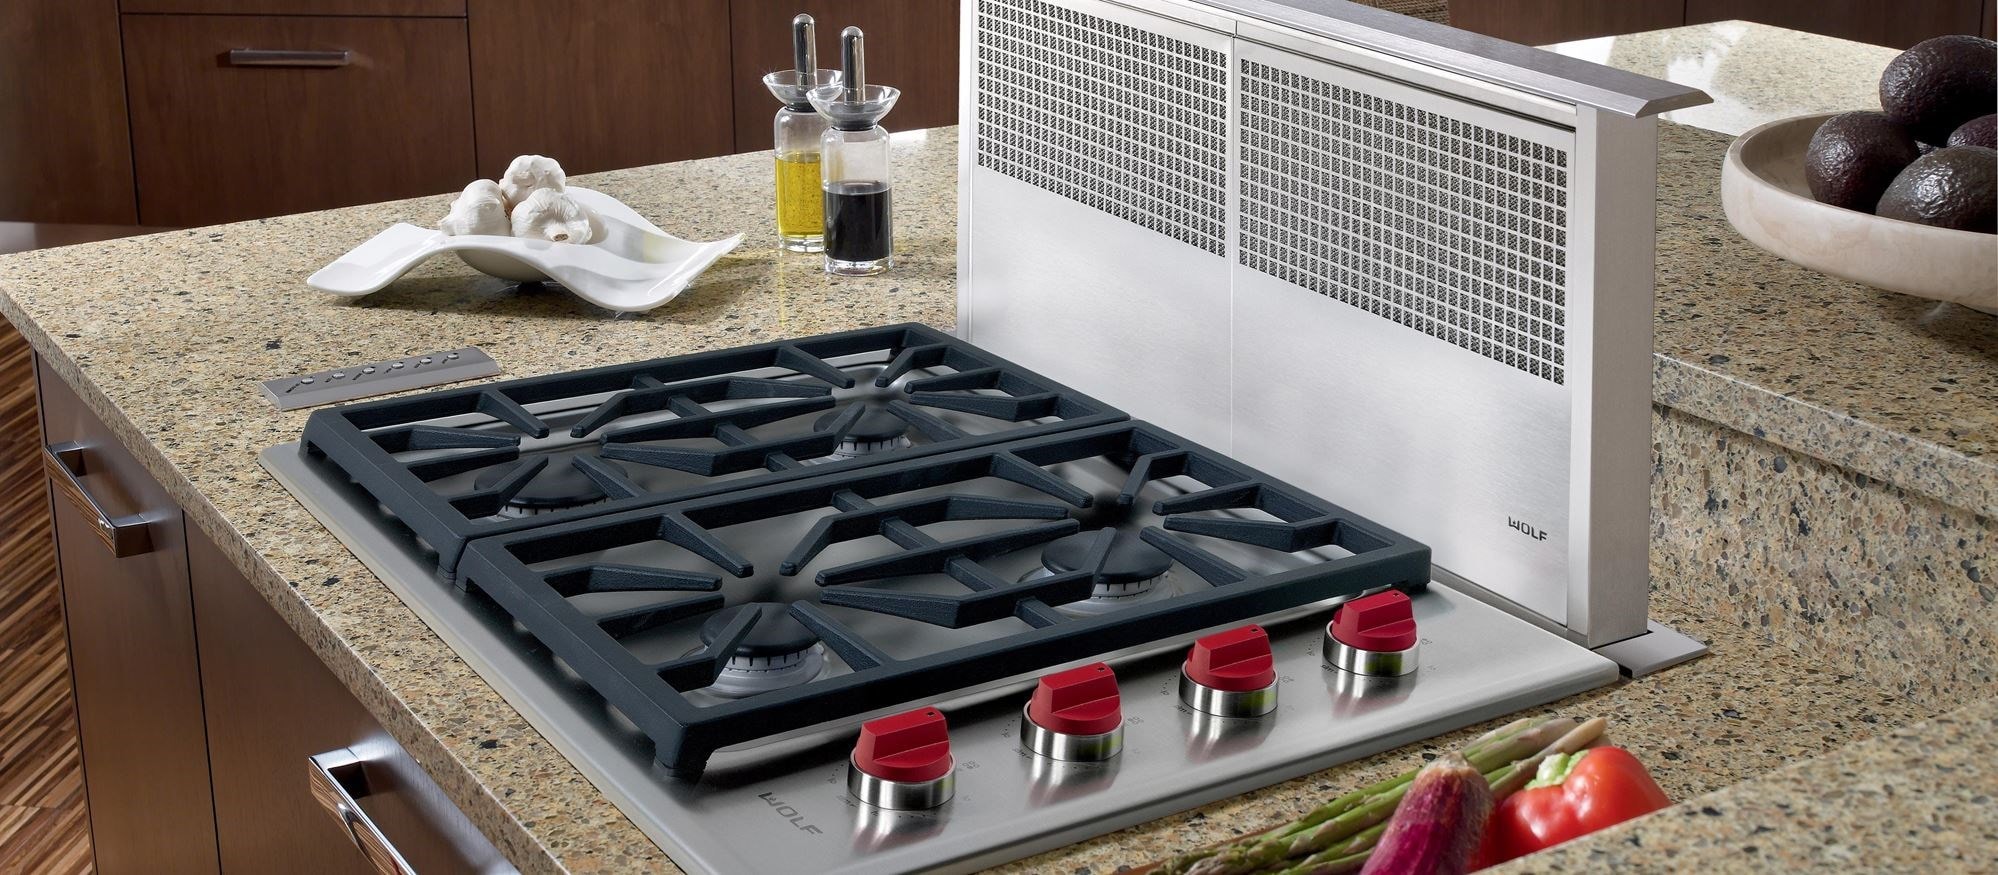 https://www.subzero-wolf.com/wolf/cooktops-and-rangetops/gas-stovetop/-/media/images/united-states/widen/product-heroes/dd30_cg304p_s_vignette.jpg?h=875&width=2000&udi=1&cropregion=0,1065,5000,3255